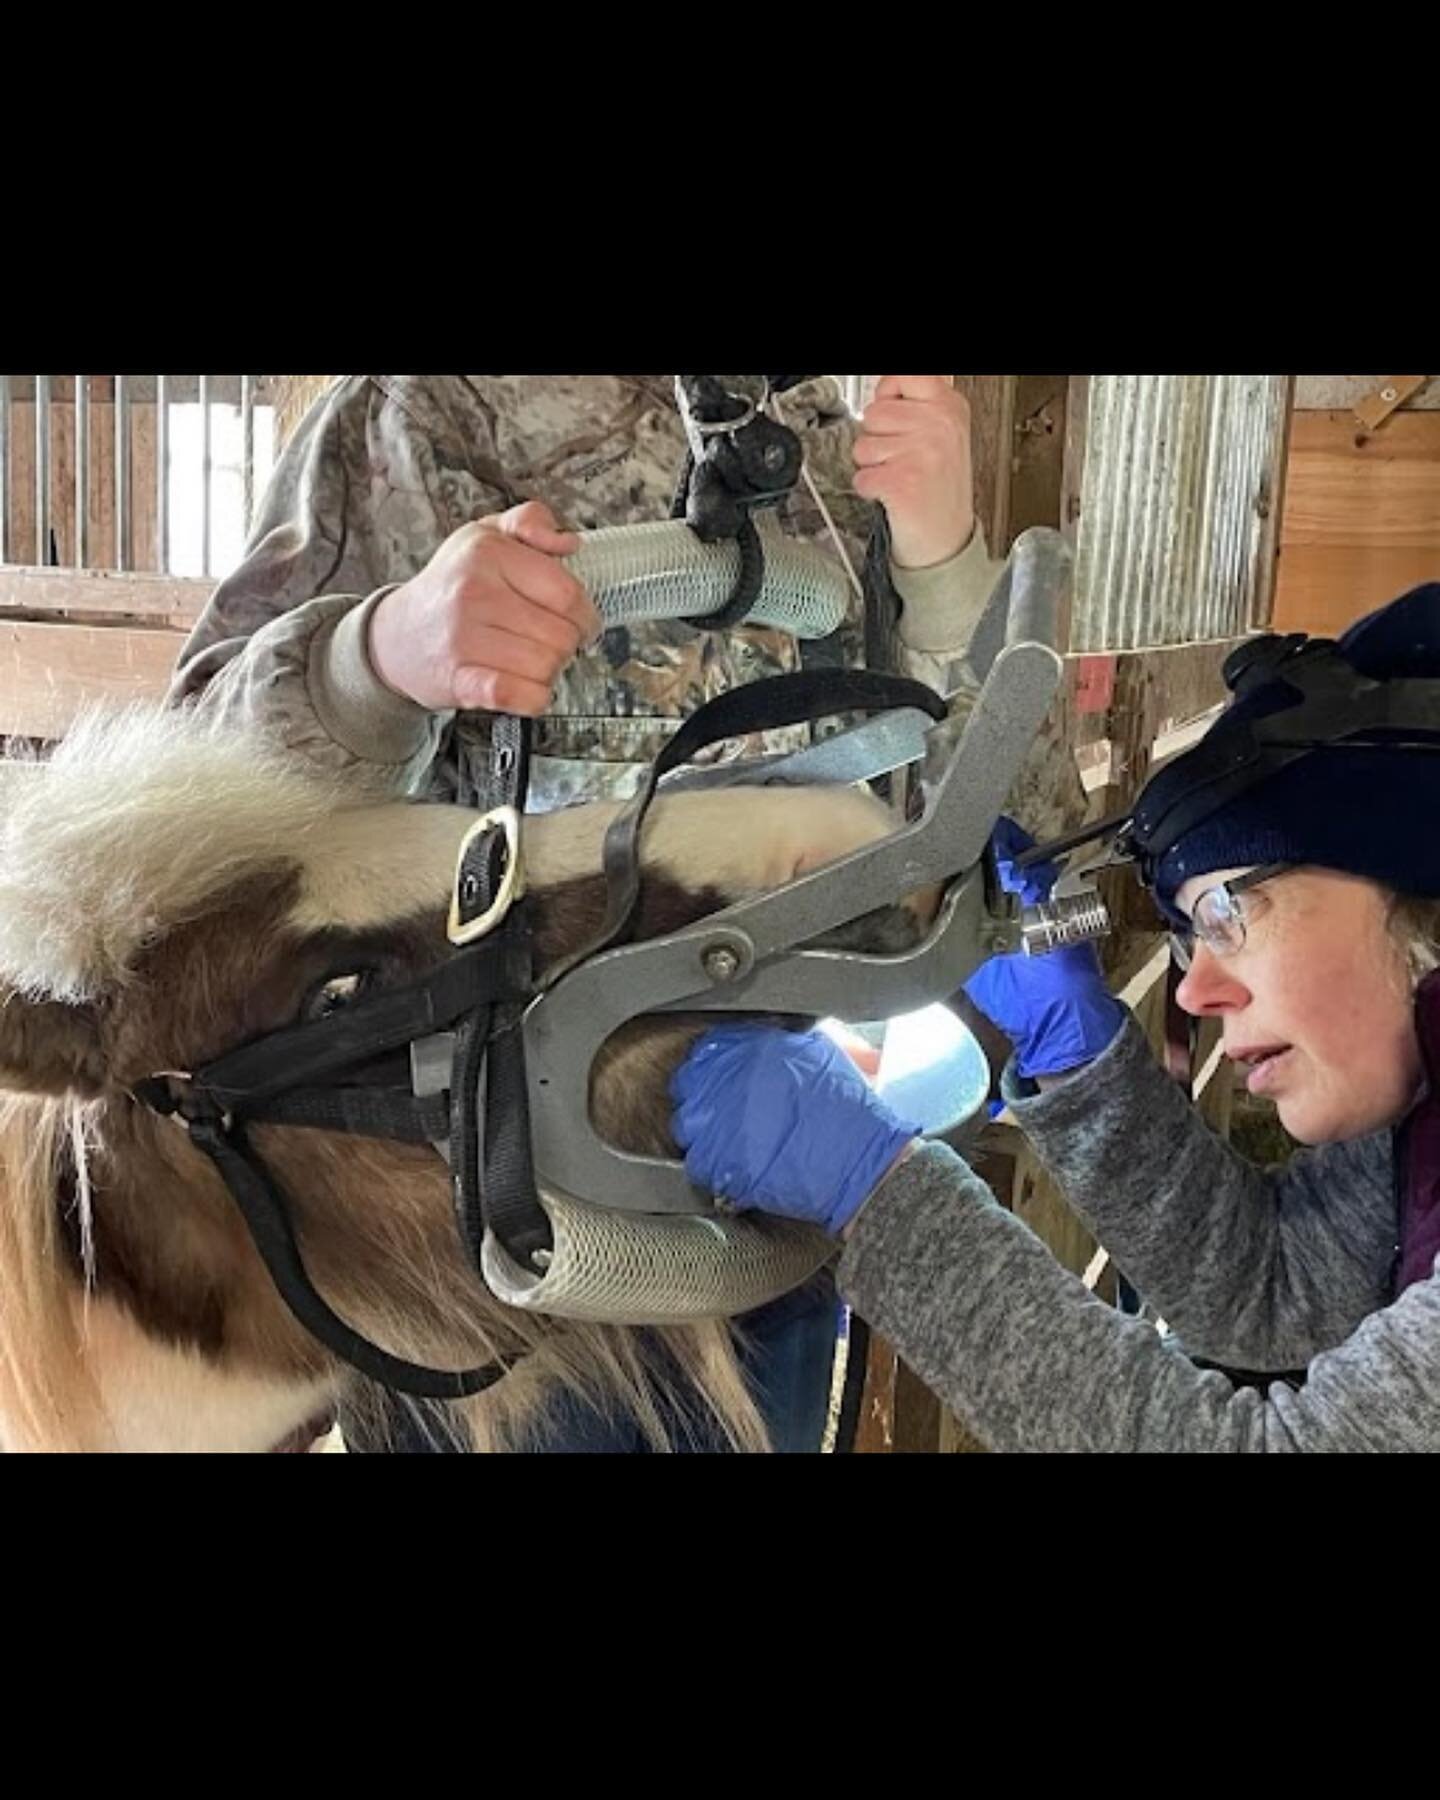 Big or small we will take care of them all. Dr Nesson spotted in action 📸
#equinedentistry #equineveterinarymedicine #horses